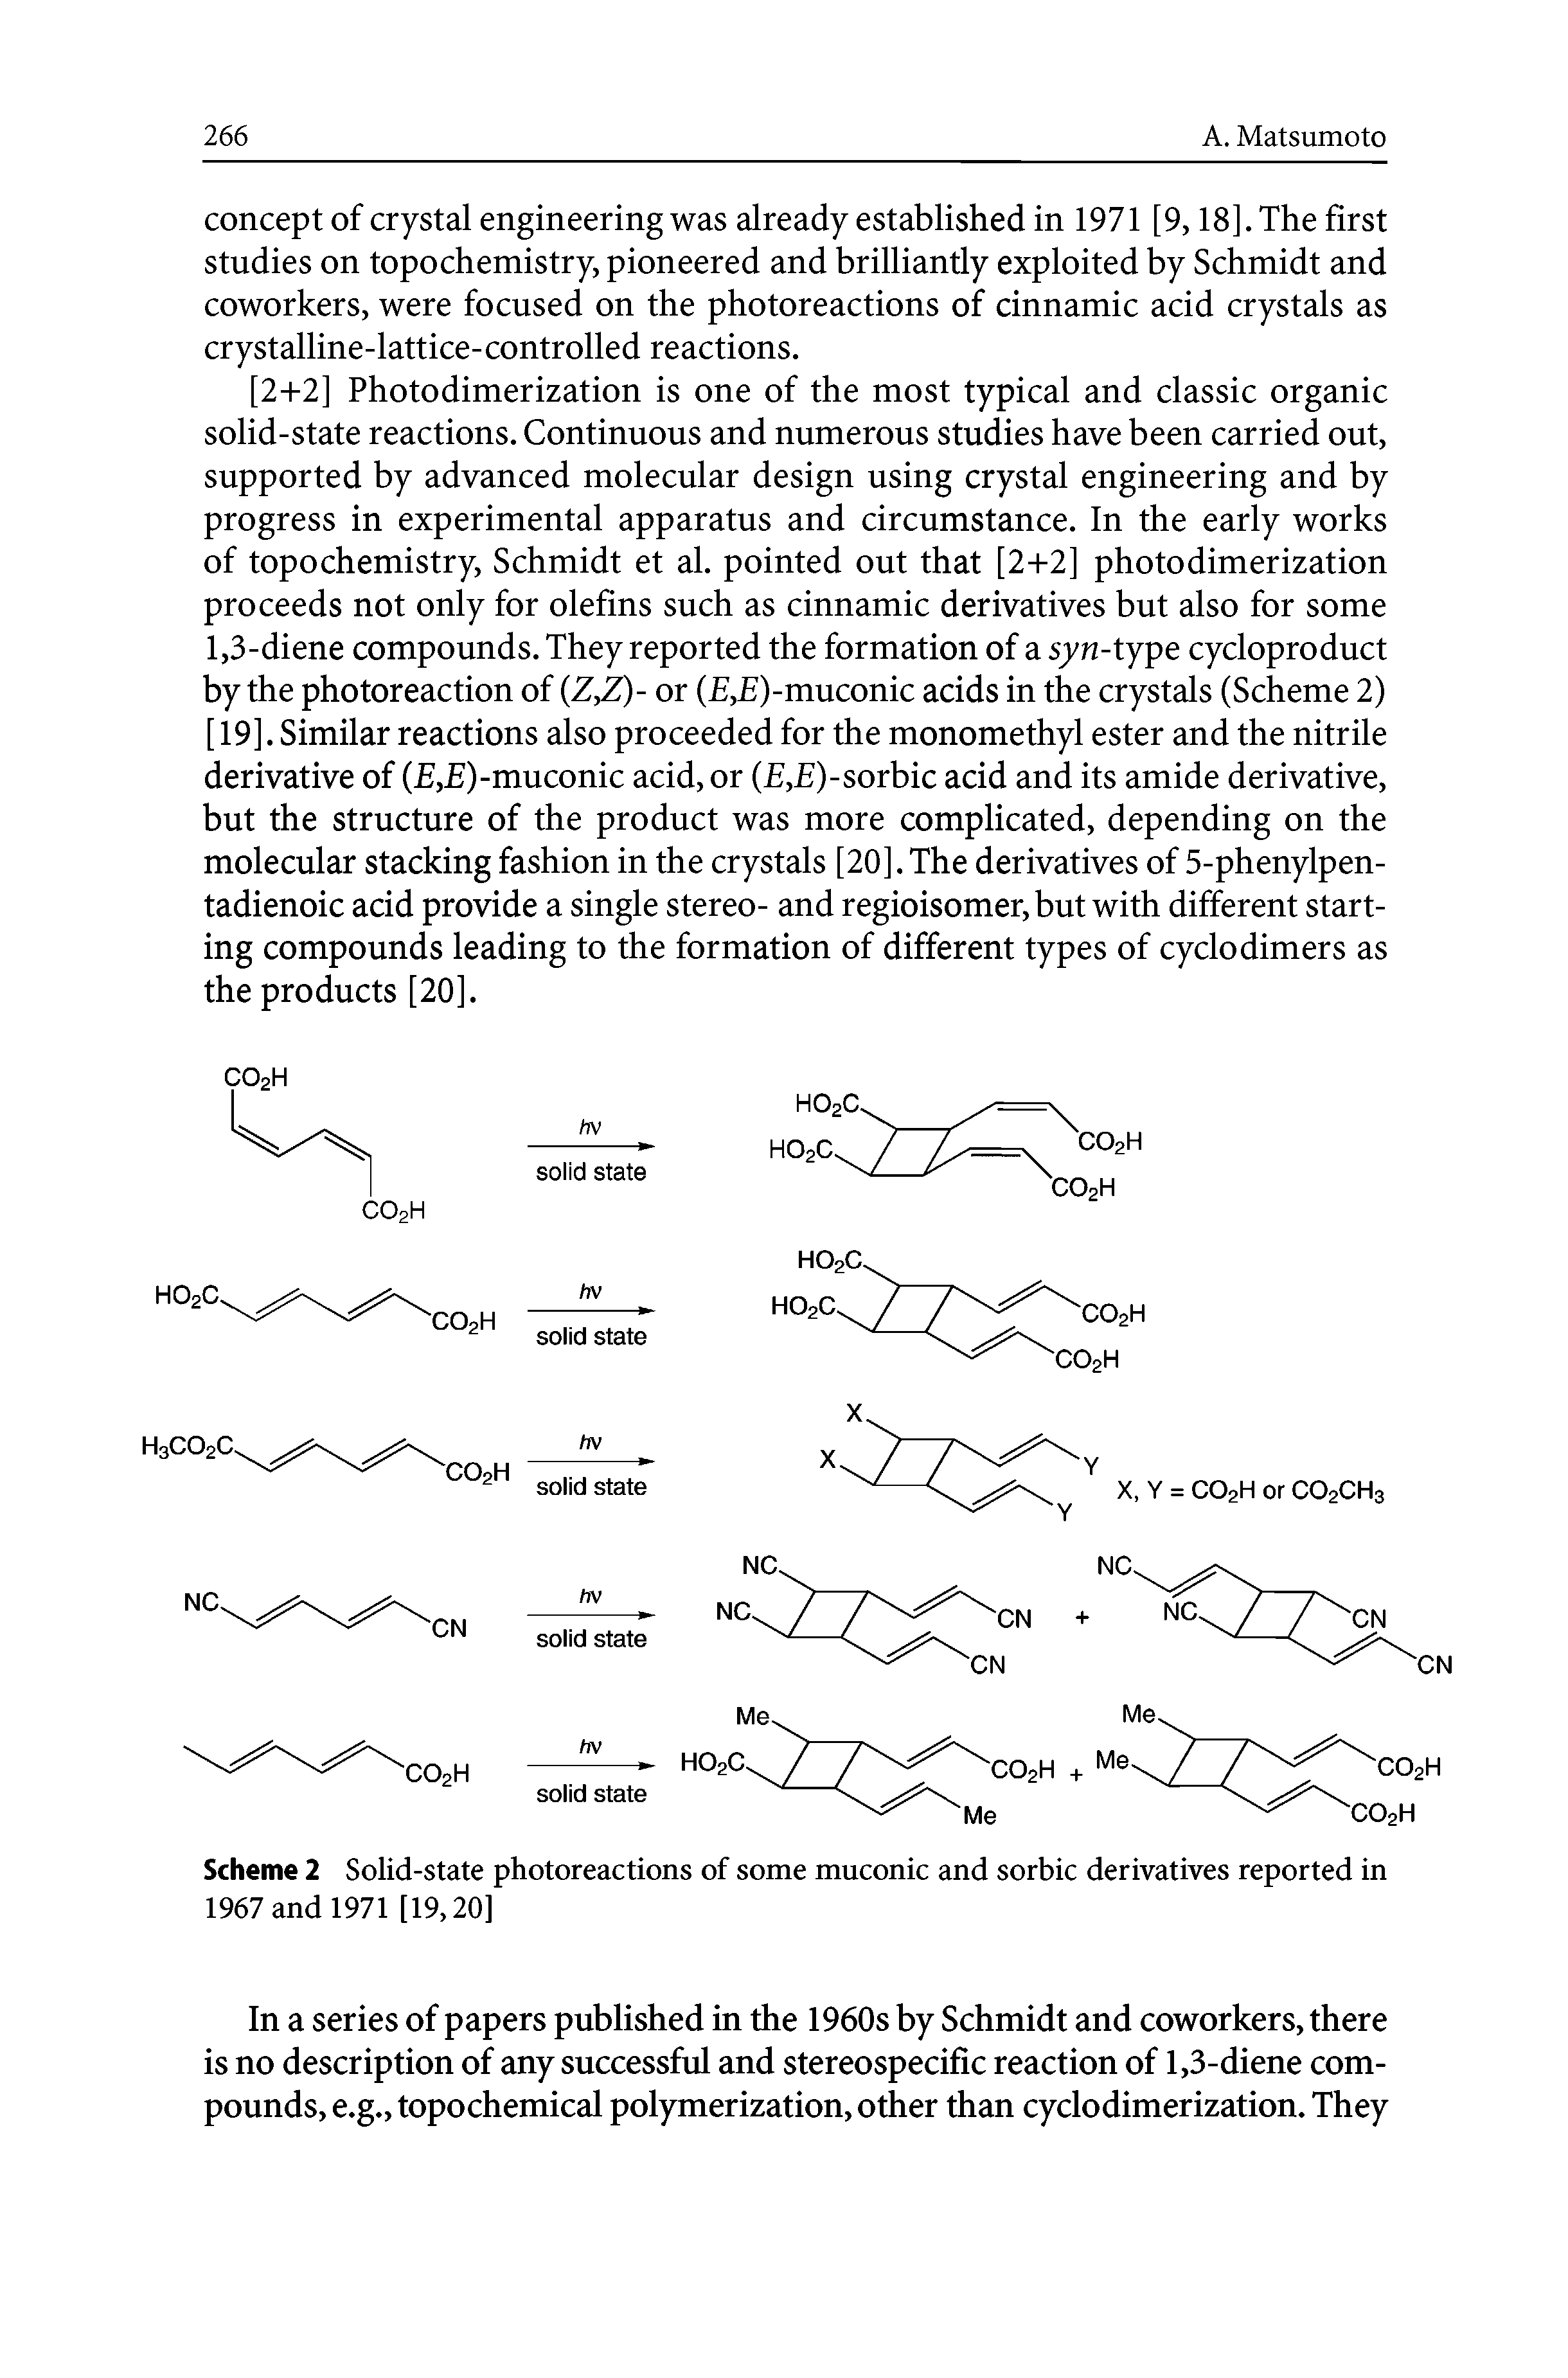 Scheme 2 Solid-state photoreactions of some muconic and sorbic derivatives reported in 1967 and 1971 [19,201...